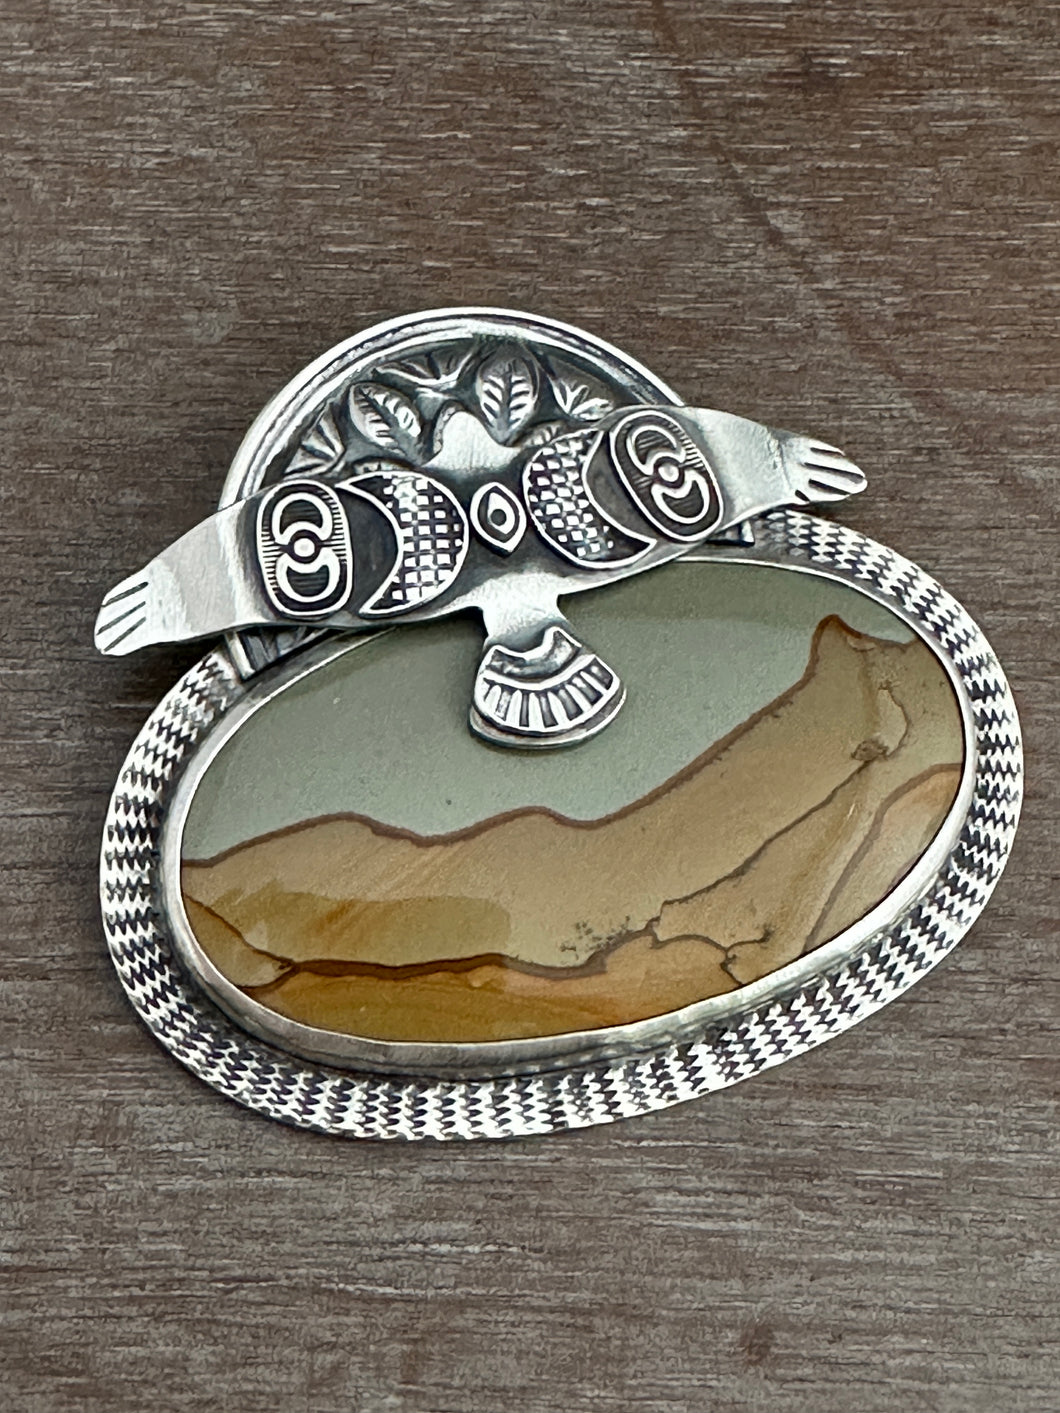 Flying Eagle with Picture Jasper Pendant7